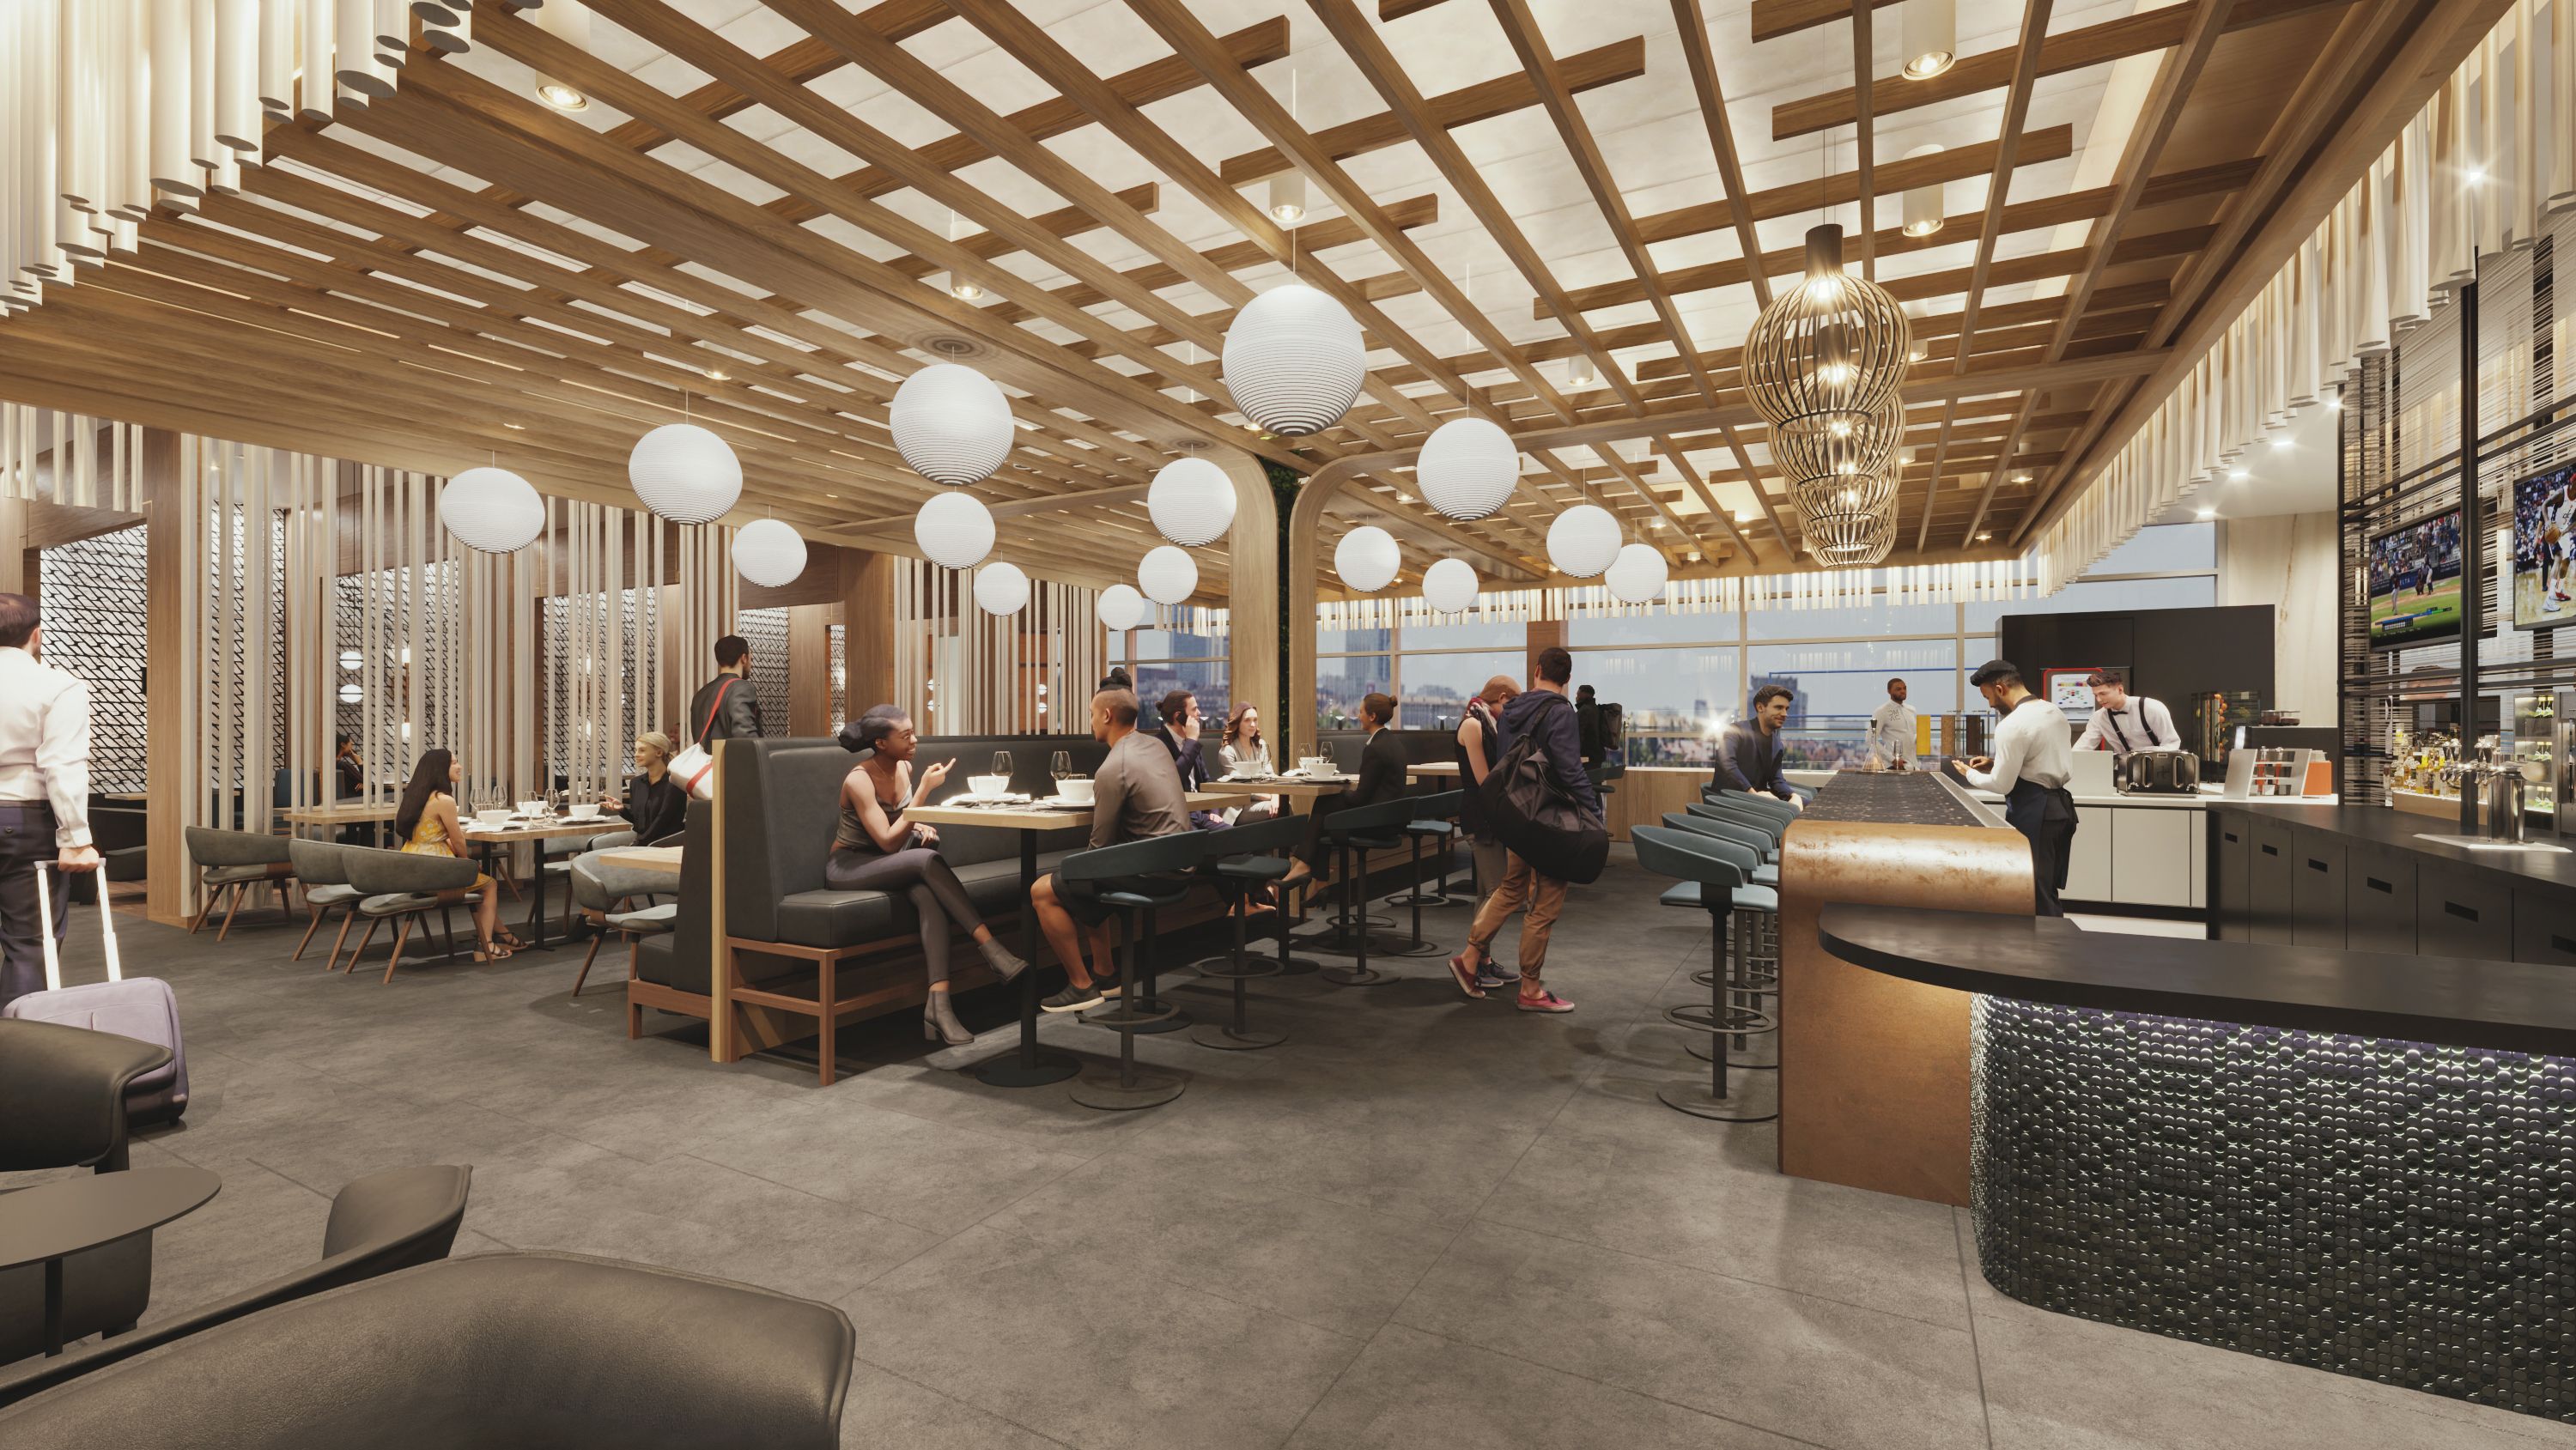 Redesigned American Airlines Reveals New Reagan National Airport